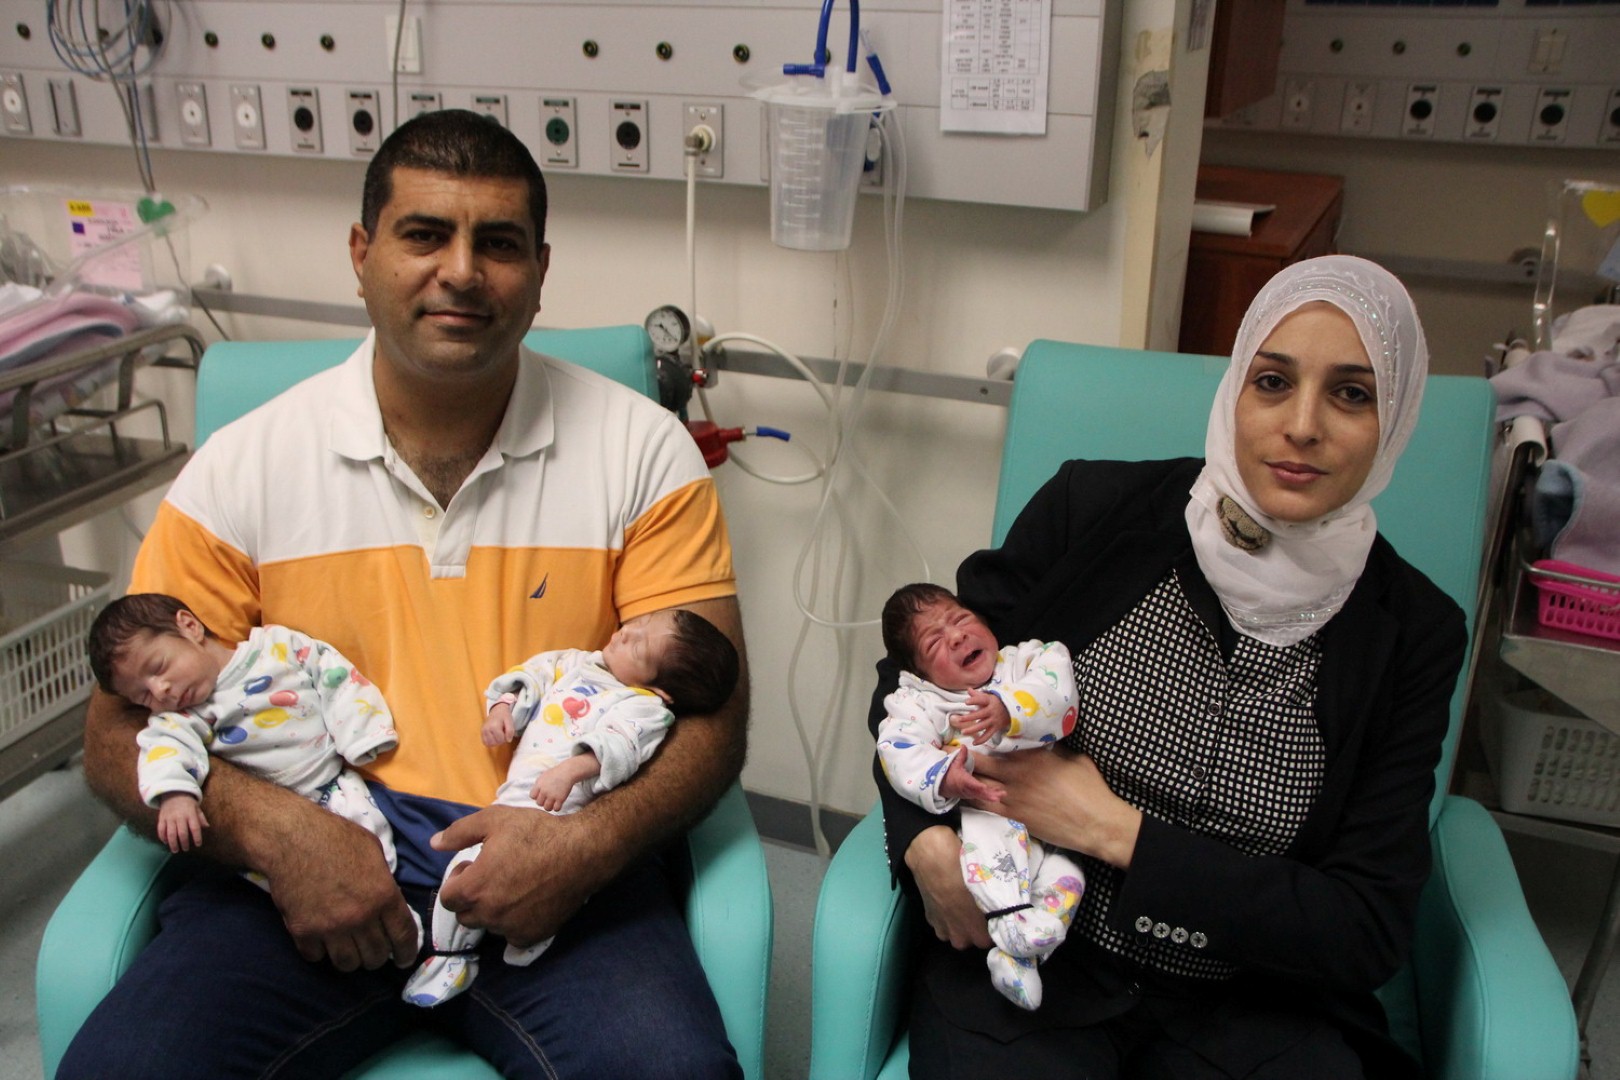 Triplets born in Israel against odds of 1 to 100,000